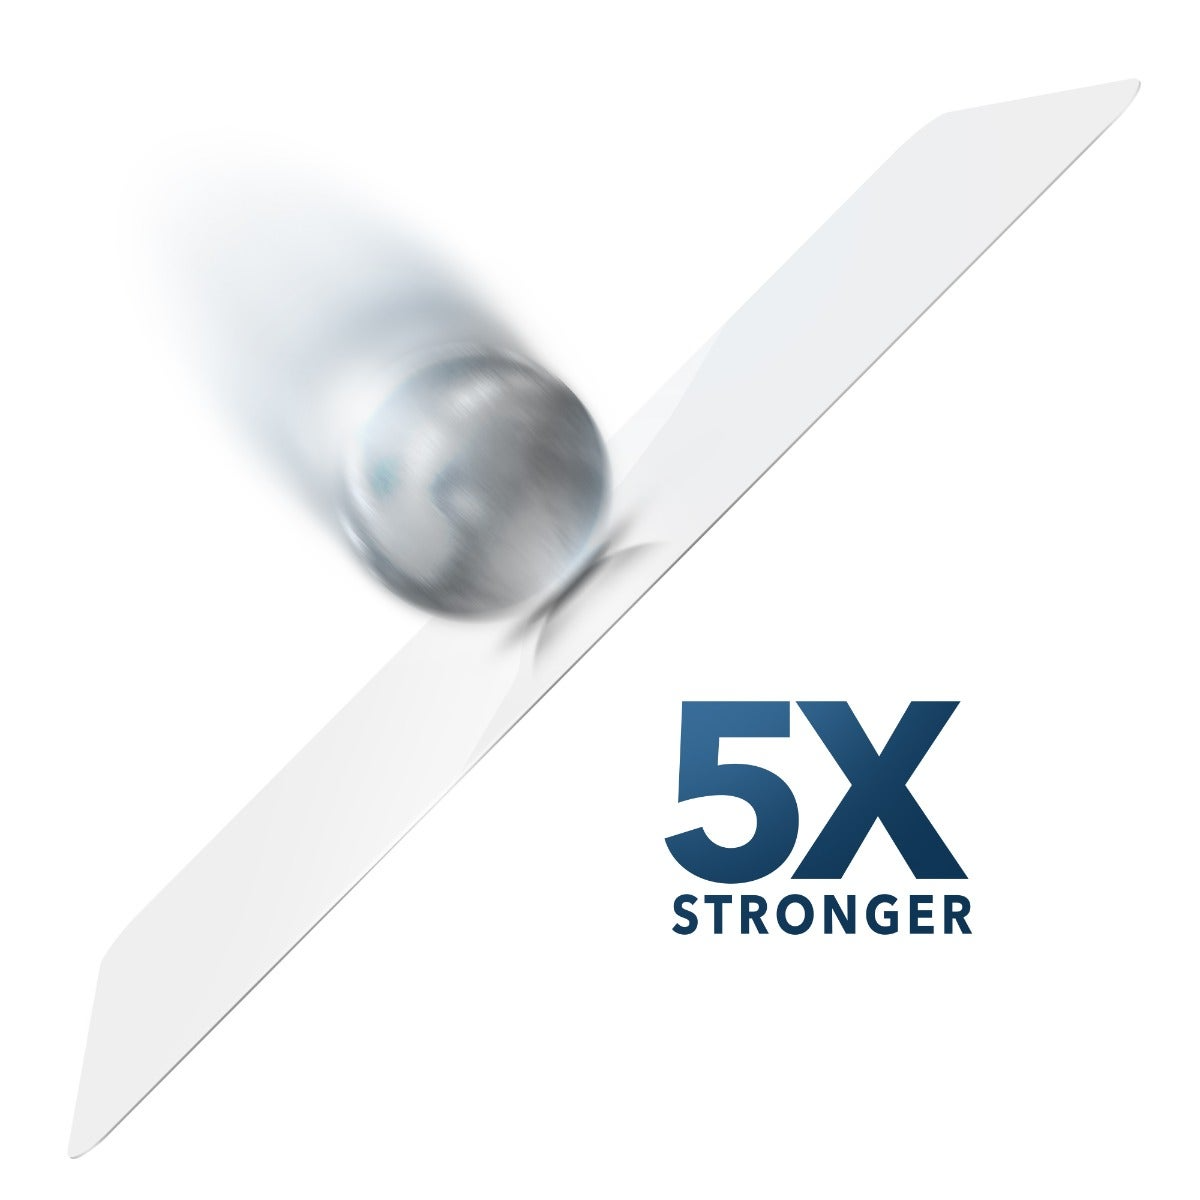 Shatter & Scratch protection: ||
5X stronger than the average lens protector.